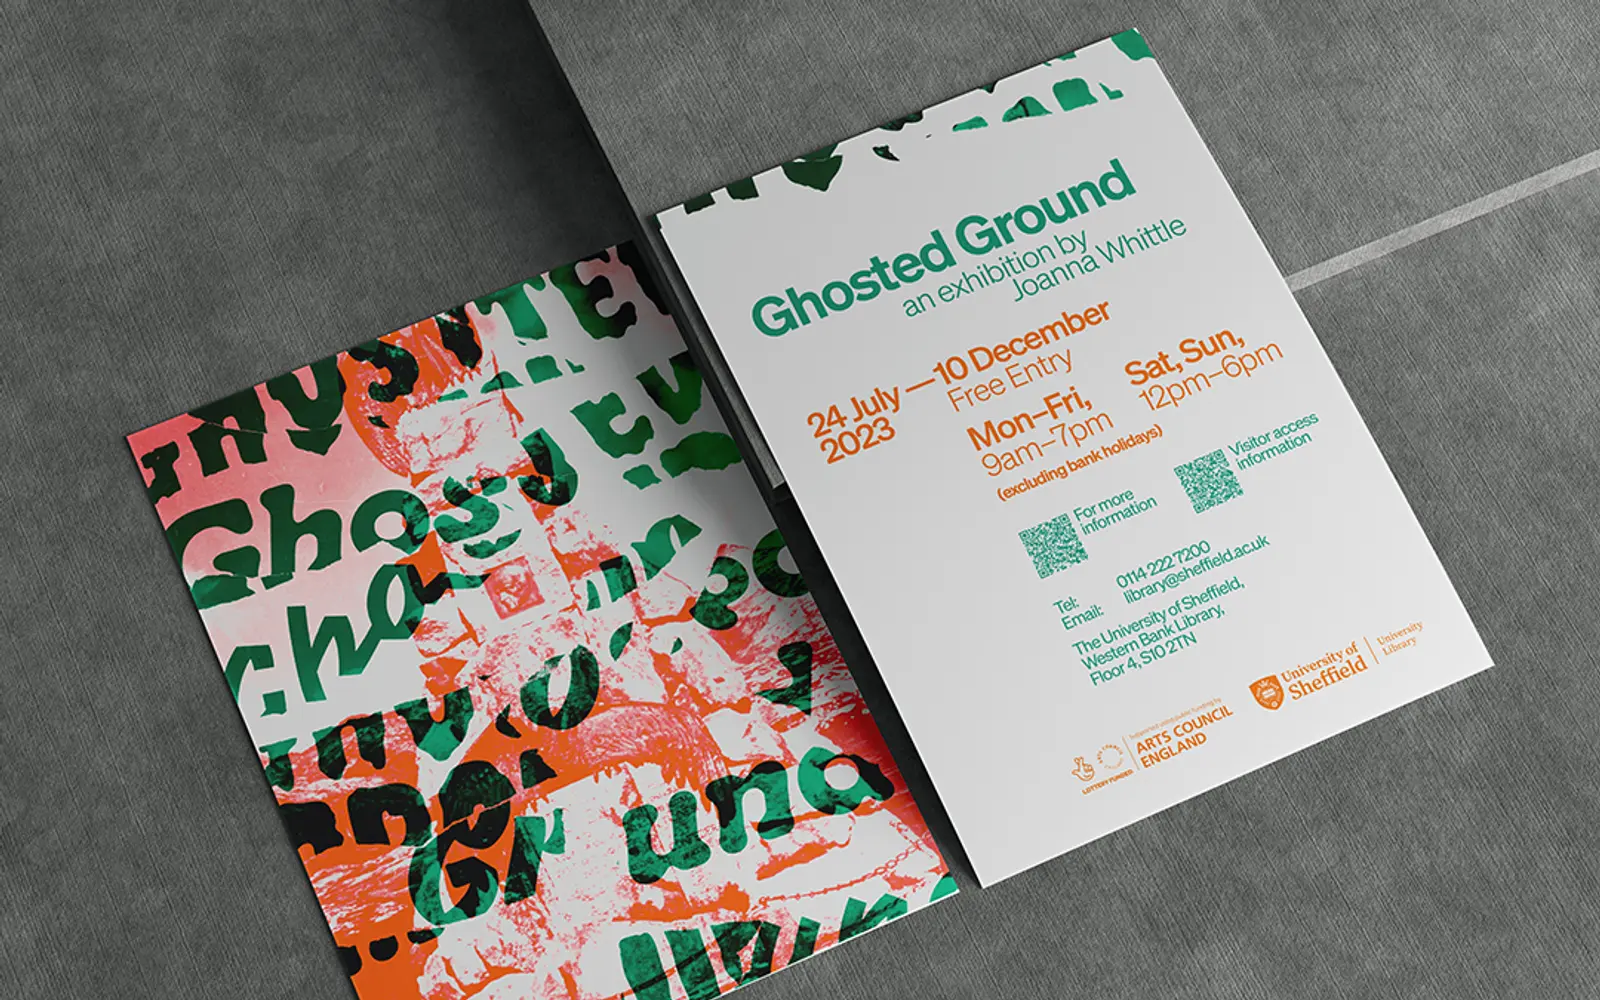 Ghosted Ground — Exhibition